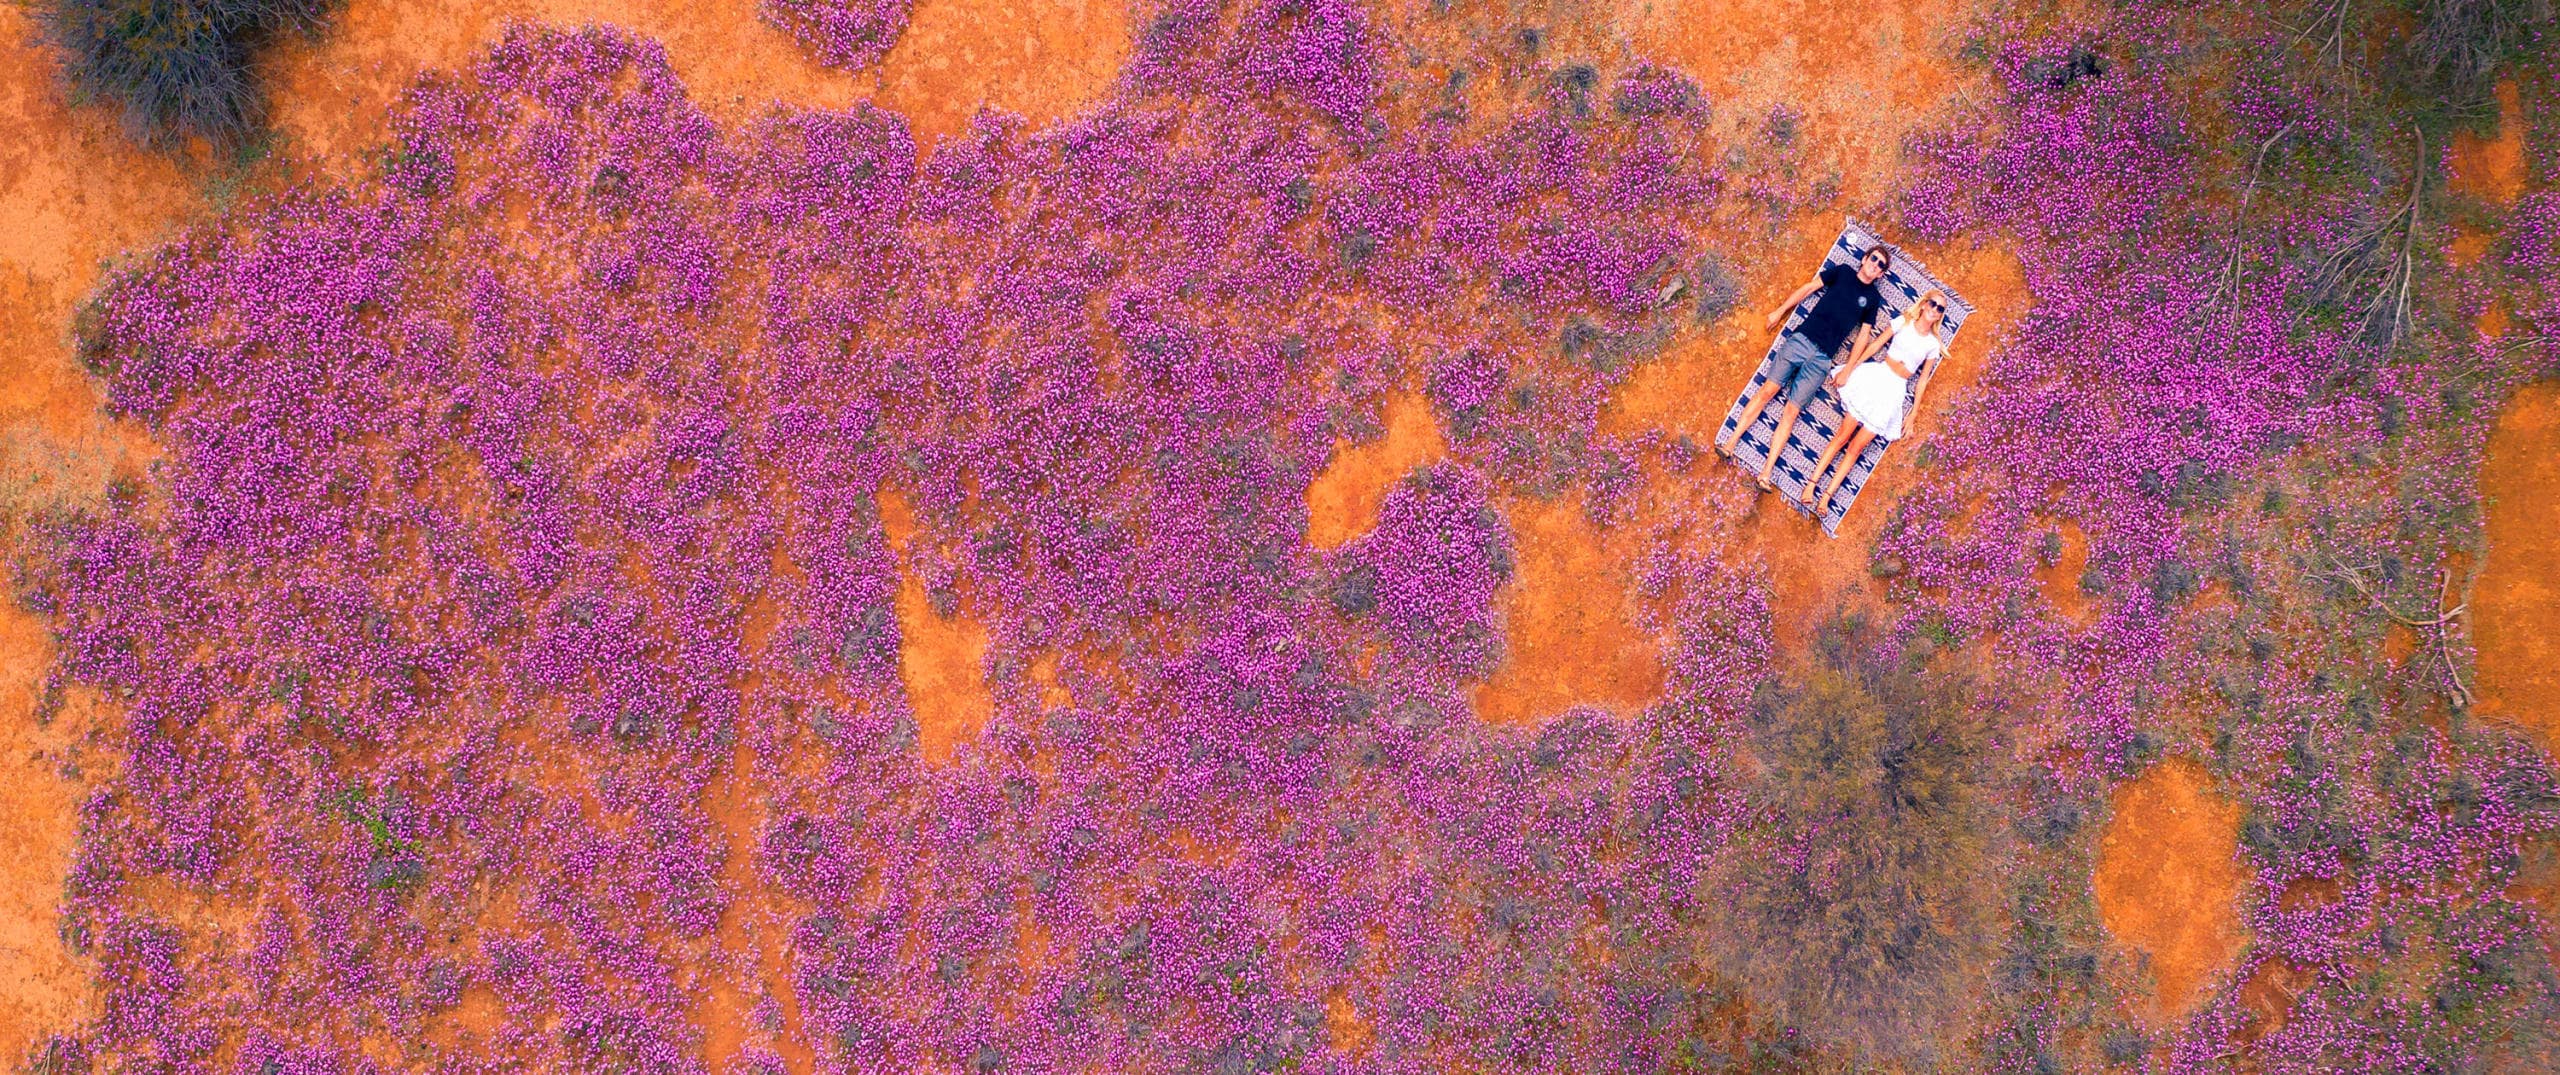 WILDFLOWER TOUR BROOME 10 DAYS 1 SCALED